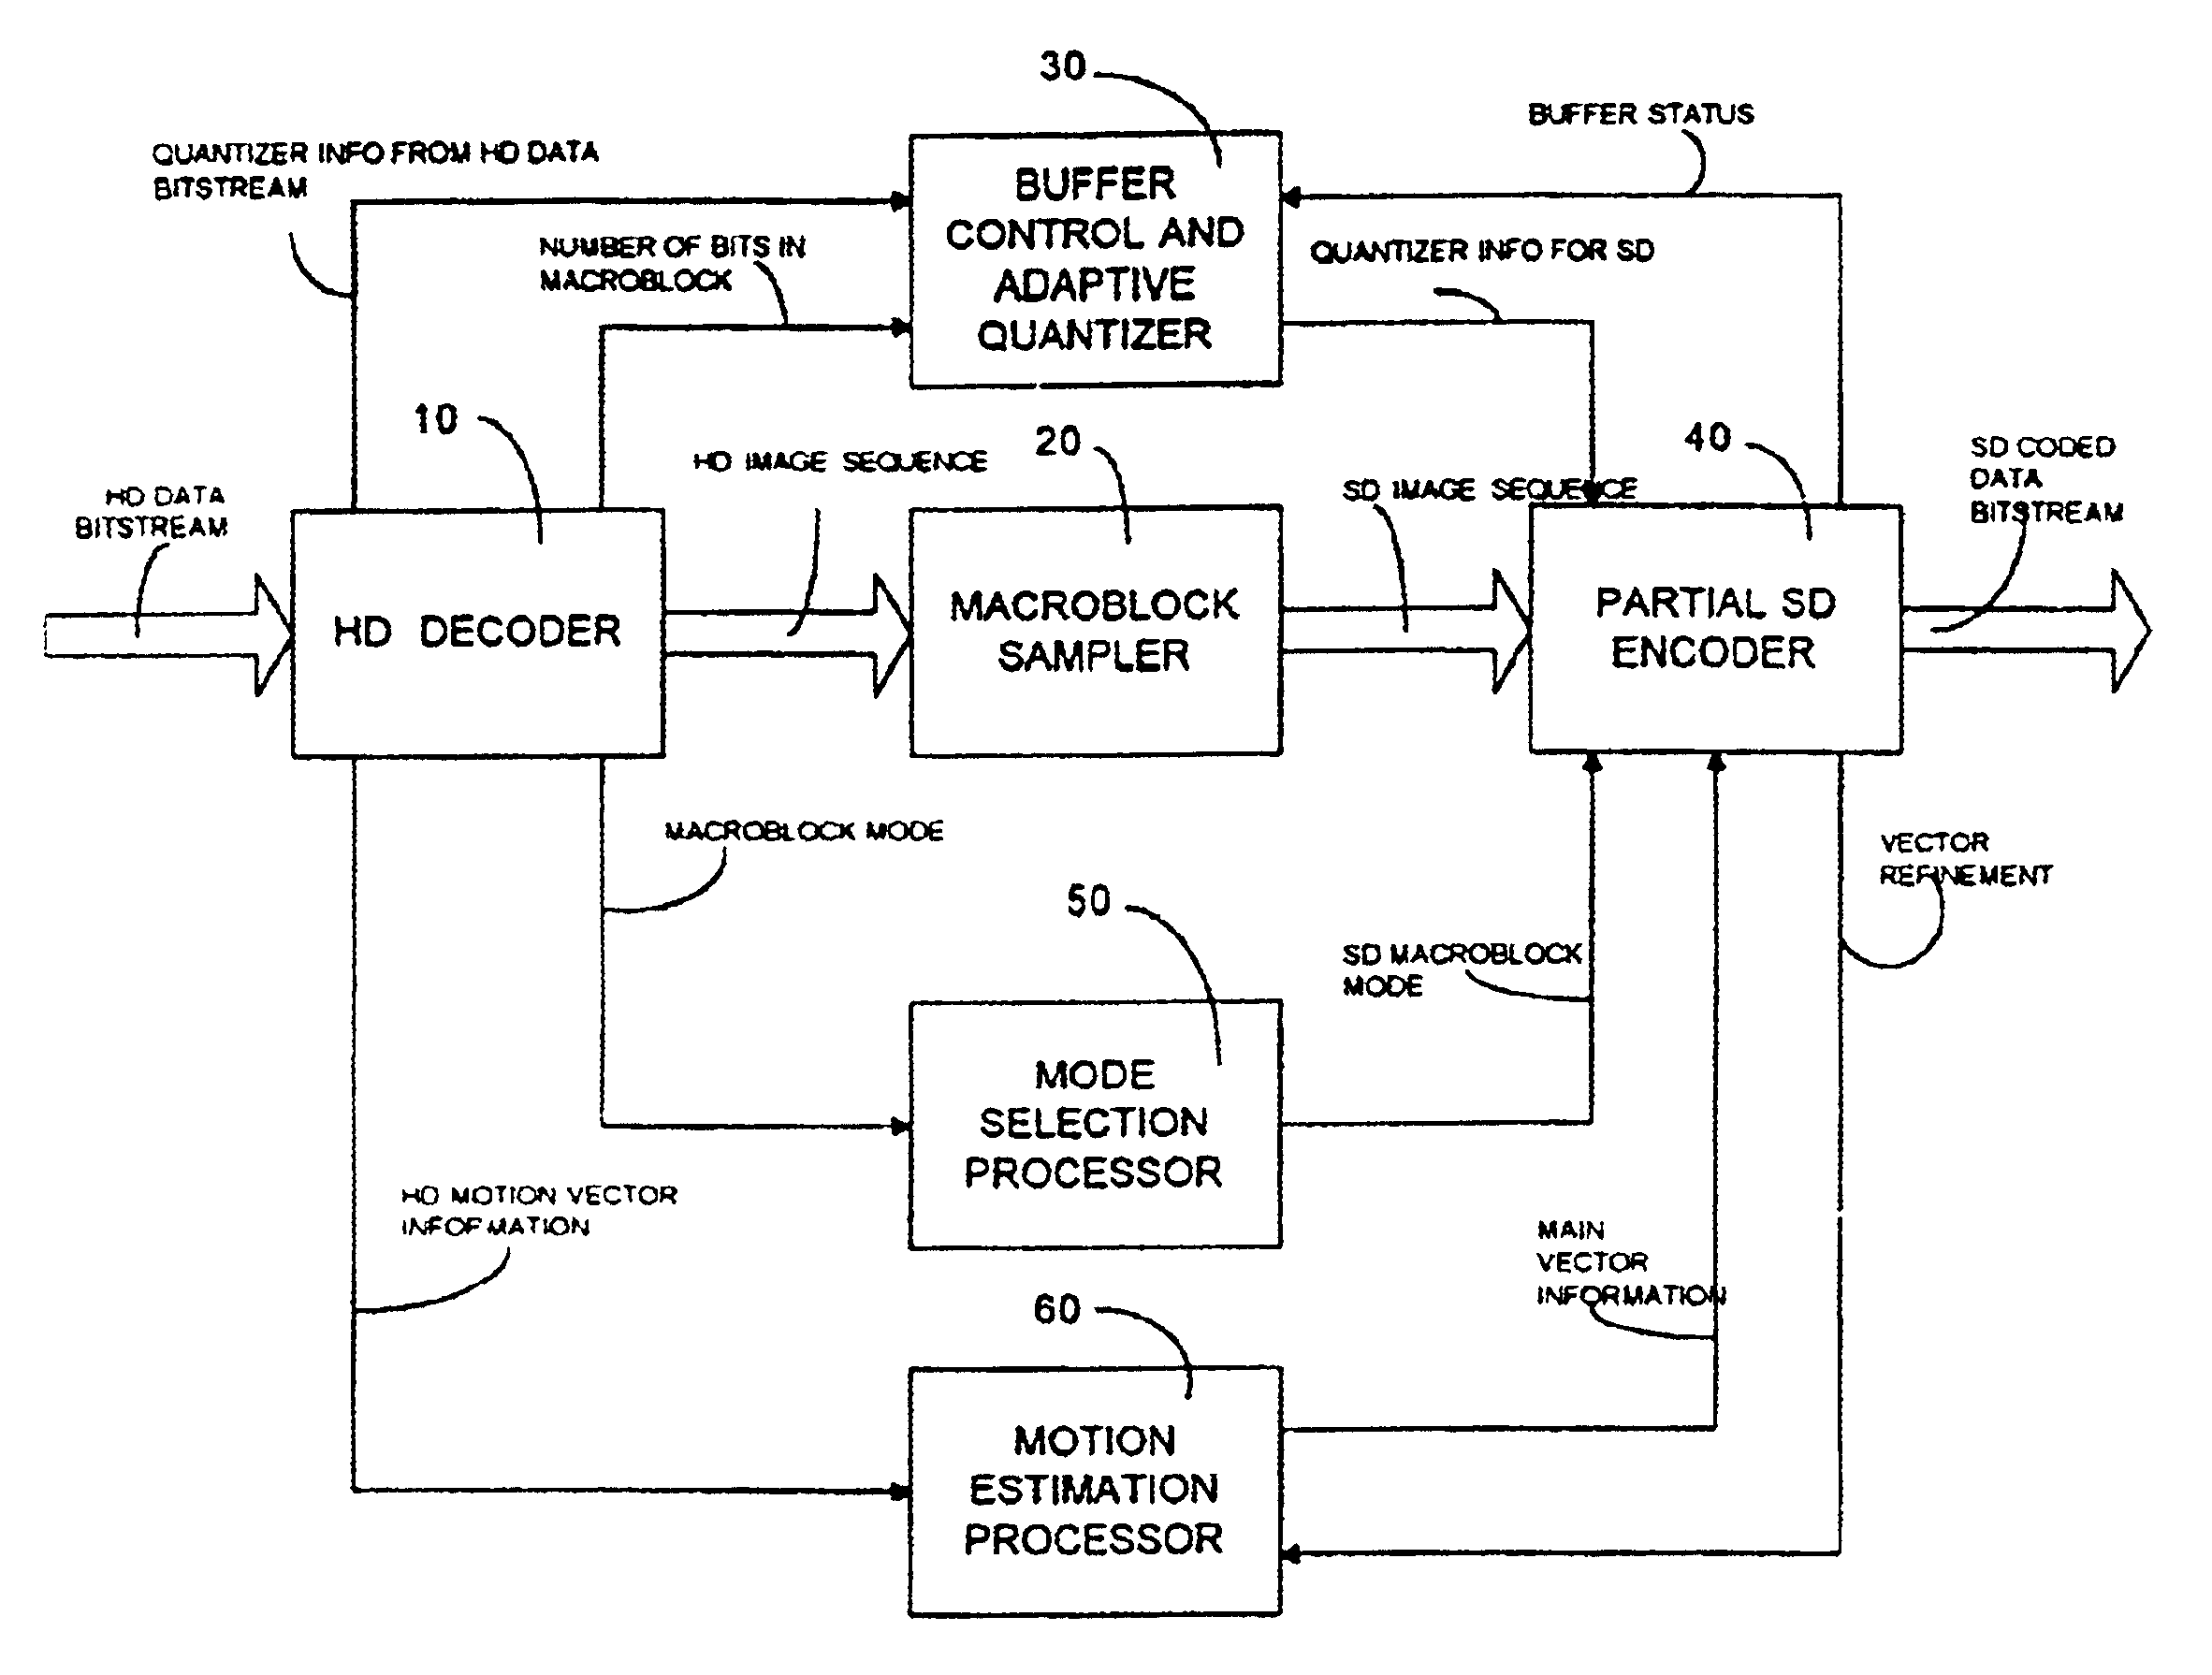 Method and apparatus for transcoding a digitally compressed high definition television bitstream to a standard definition television bitstream